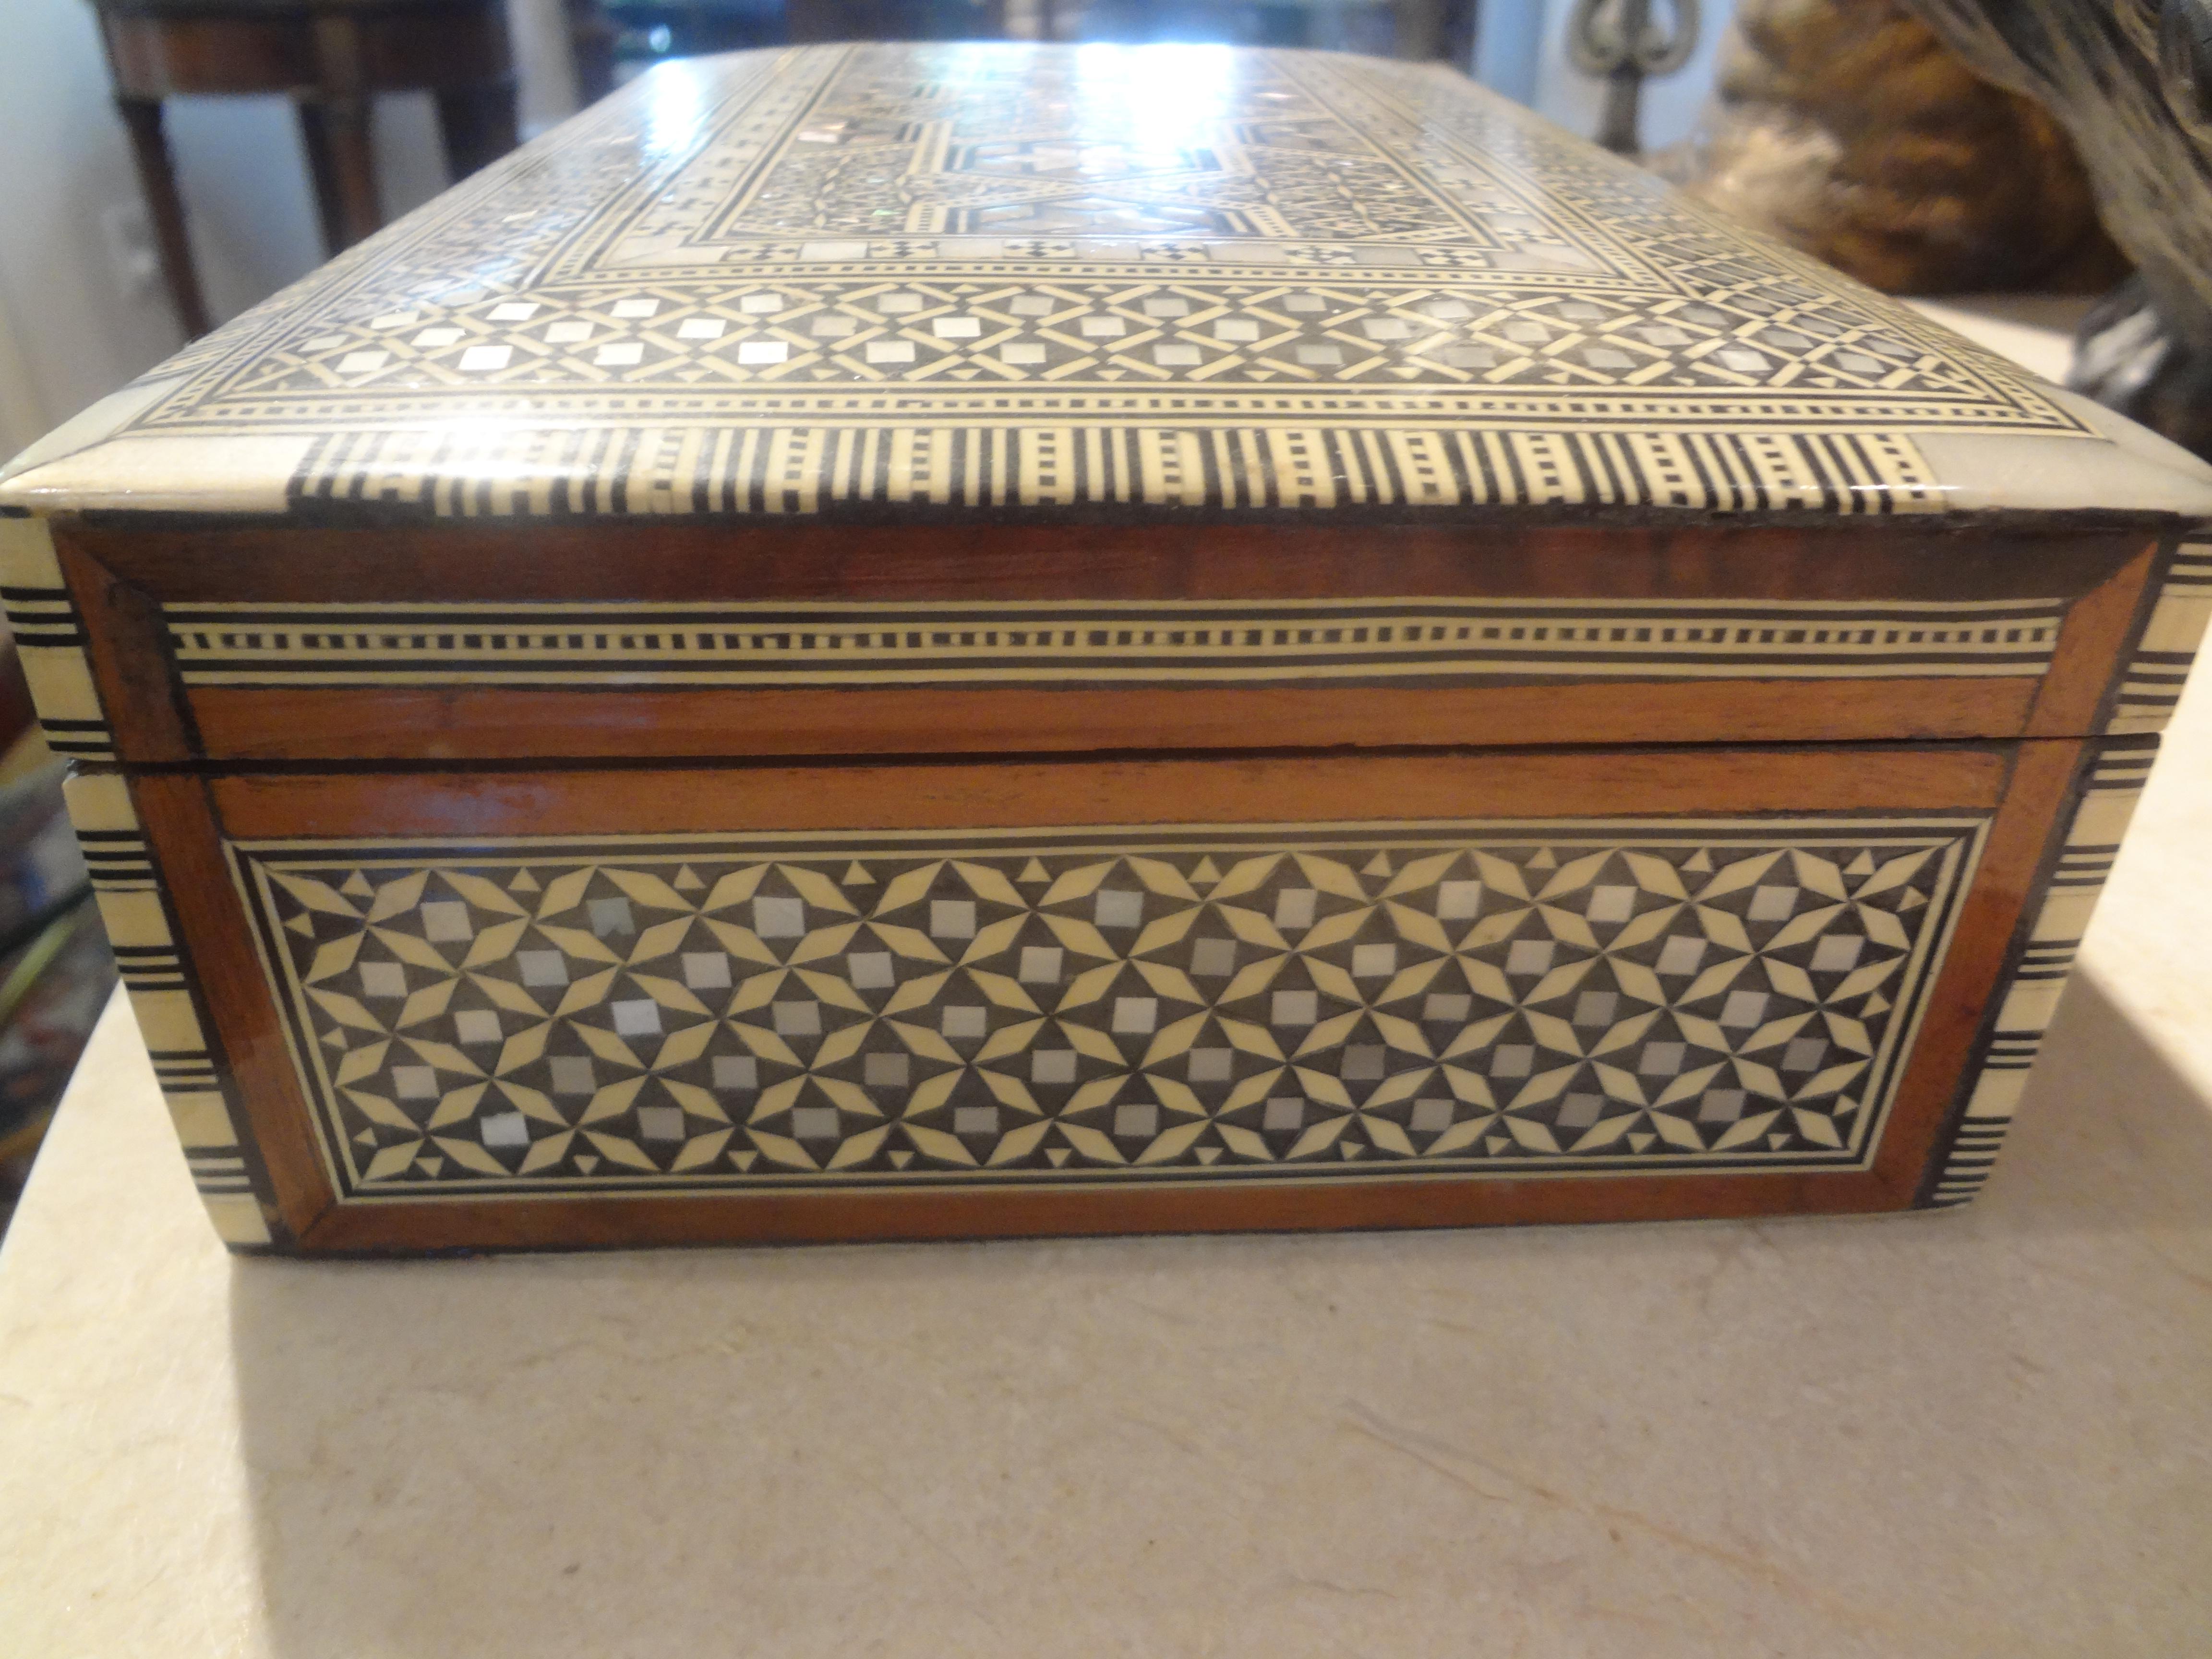 20th Century Middle Eastern/Moorish Decorative Box of Inlaid Woods and Mother-of-pearl